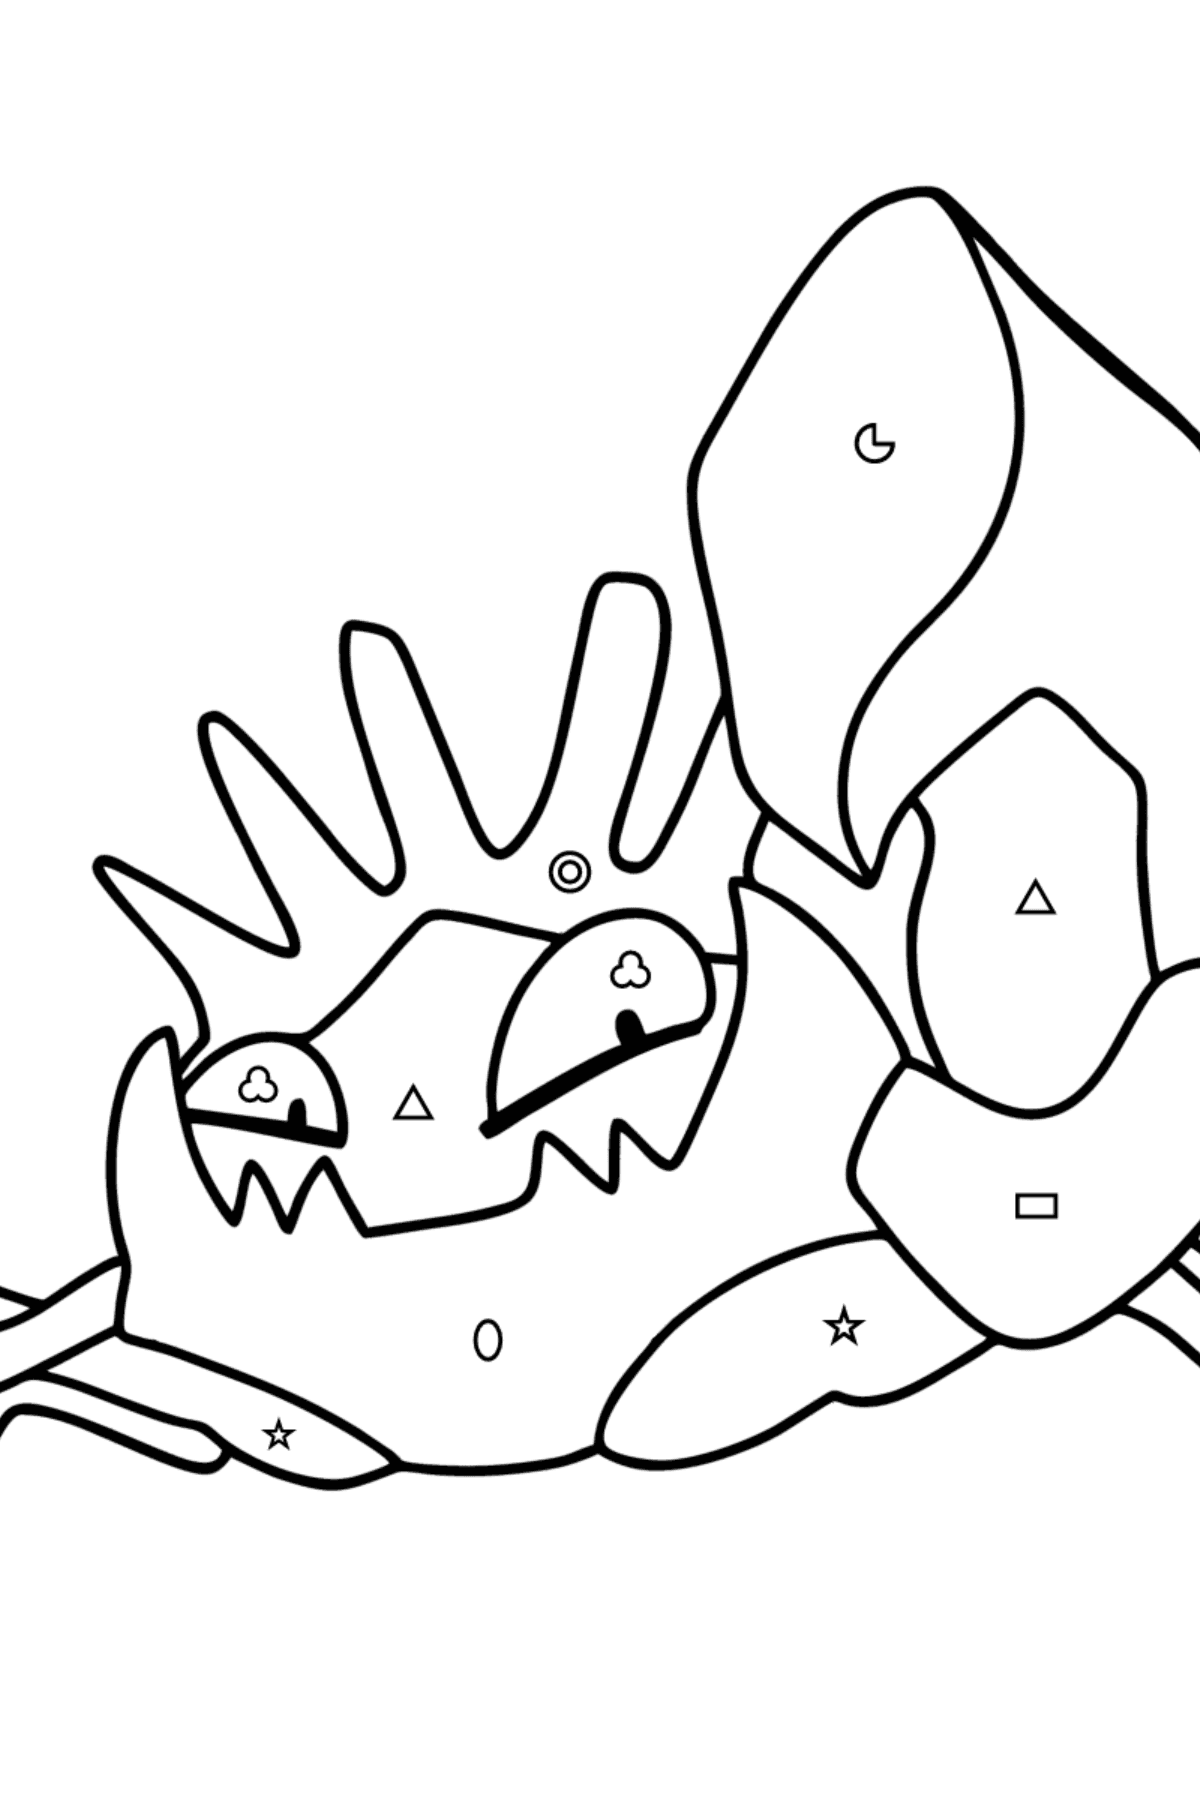 Pokemon Go Kingler coloring page - Coloring by Geometric Shapes for Kids